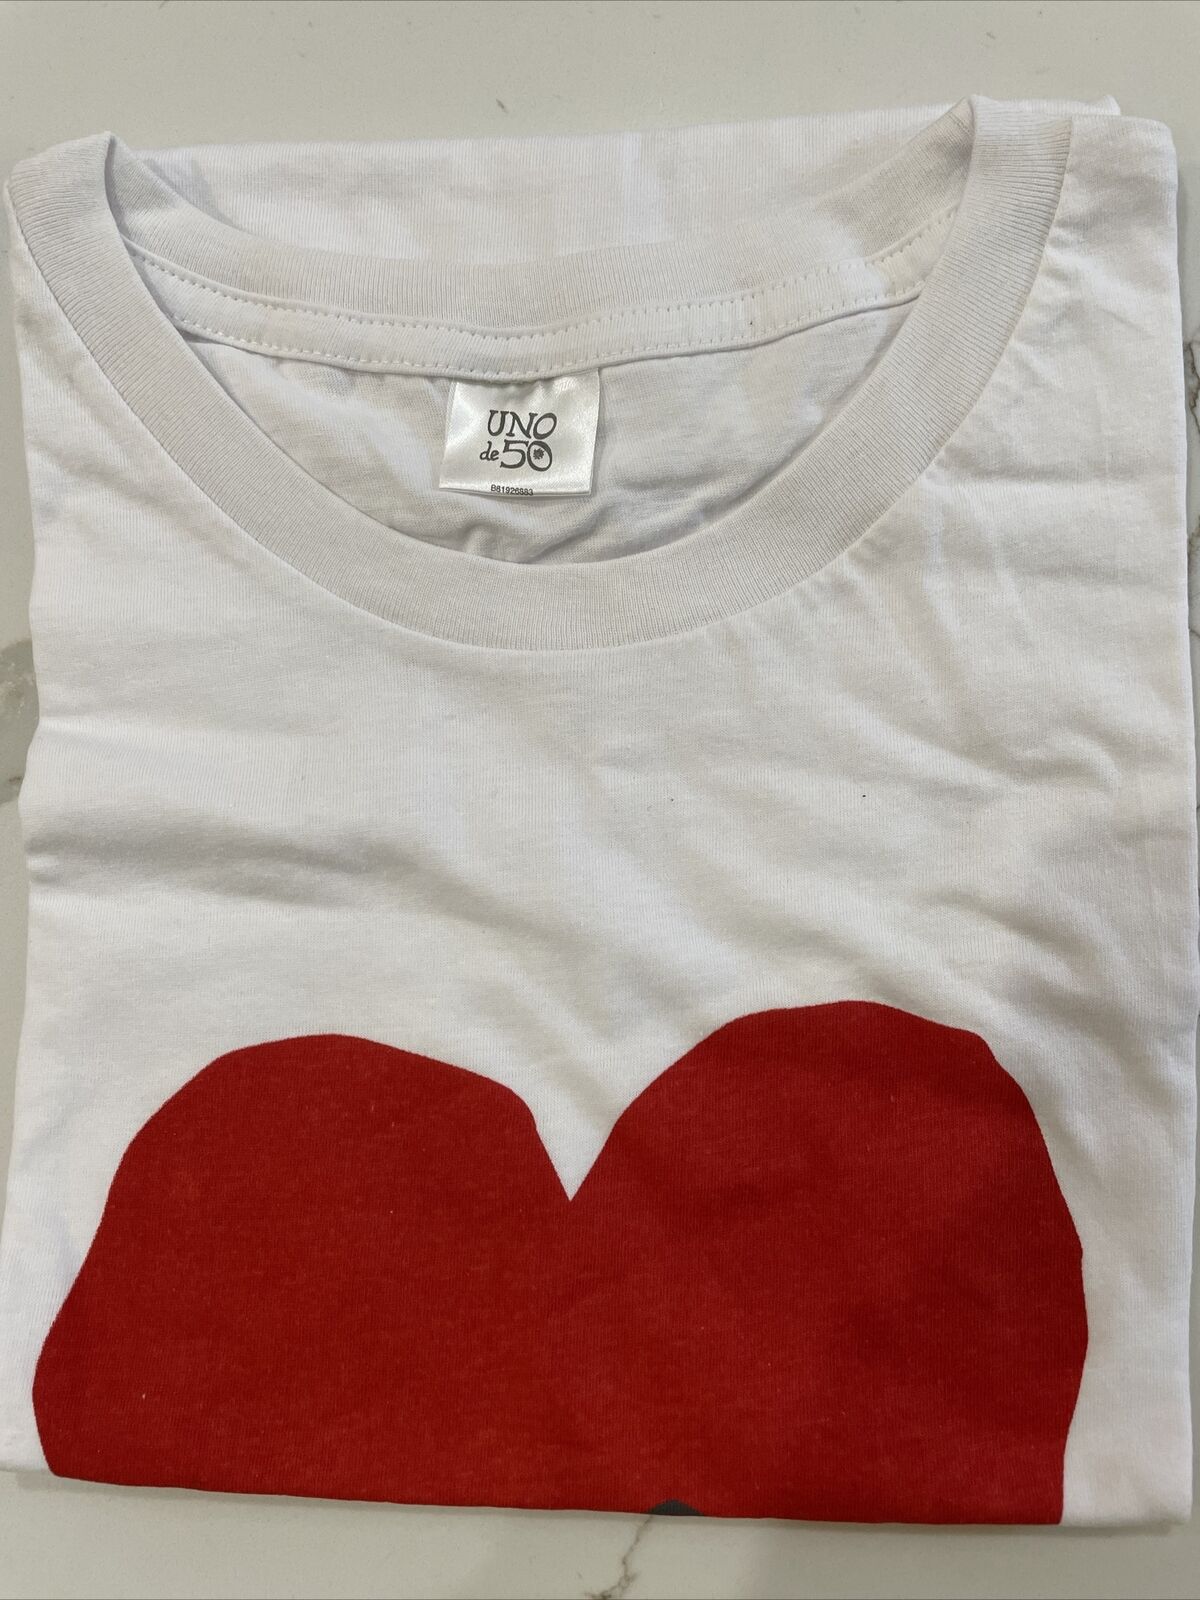 UNO de 50 red heart white cotton one size tee NEW